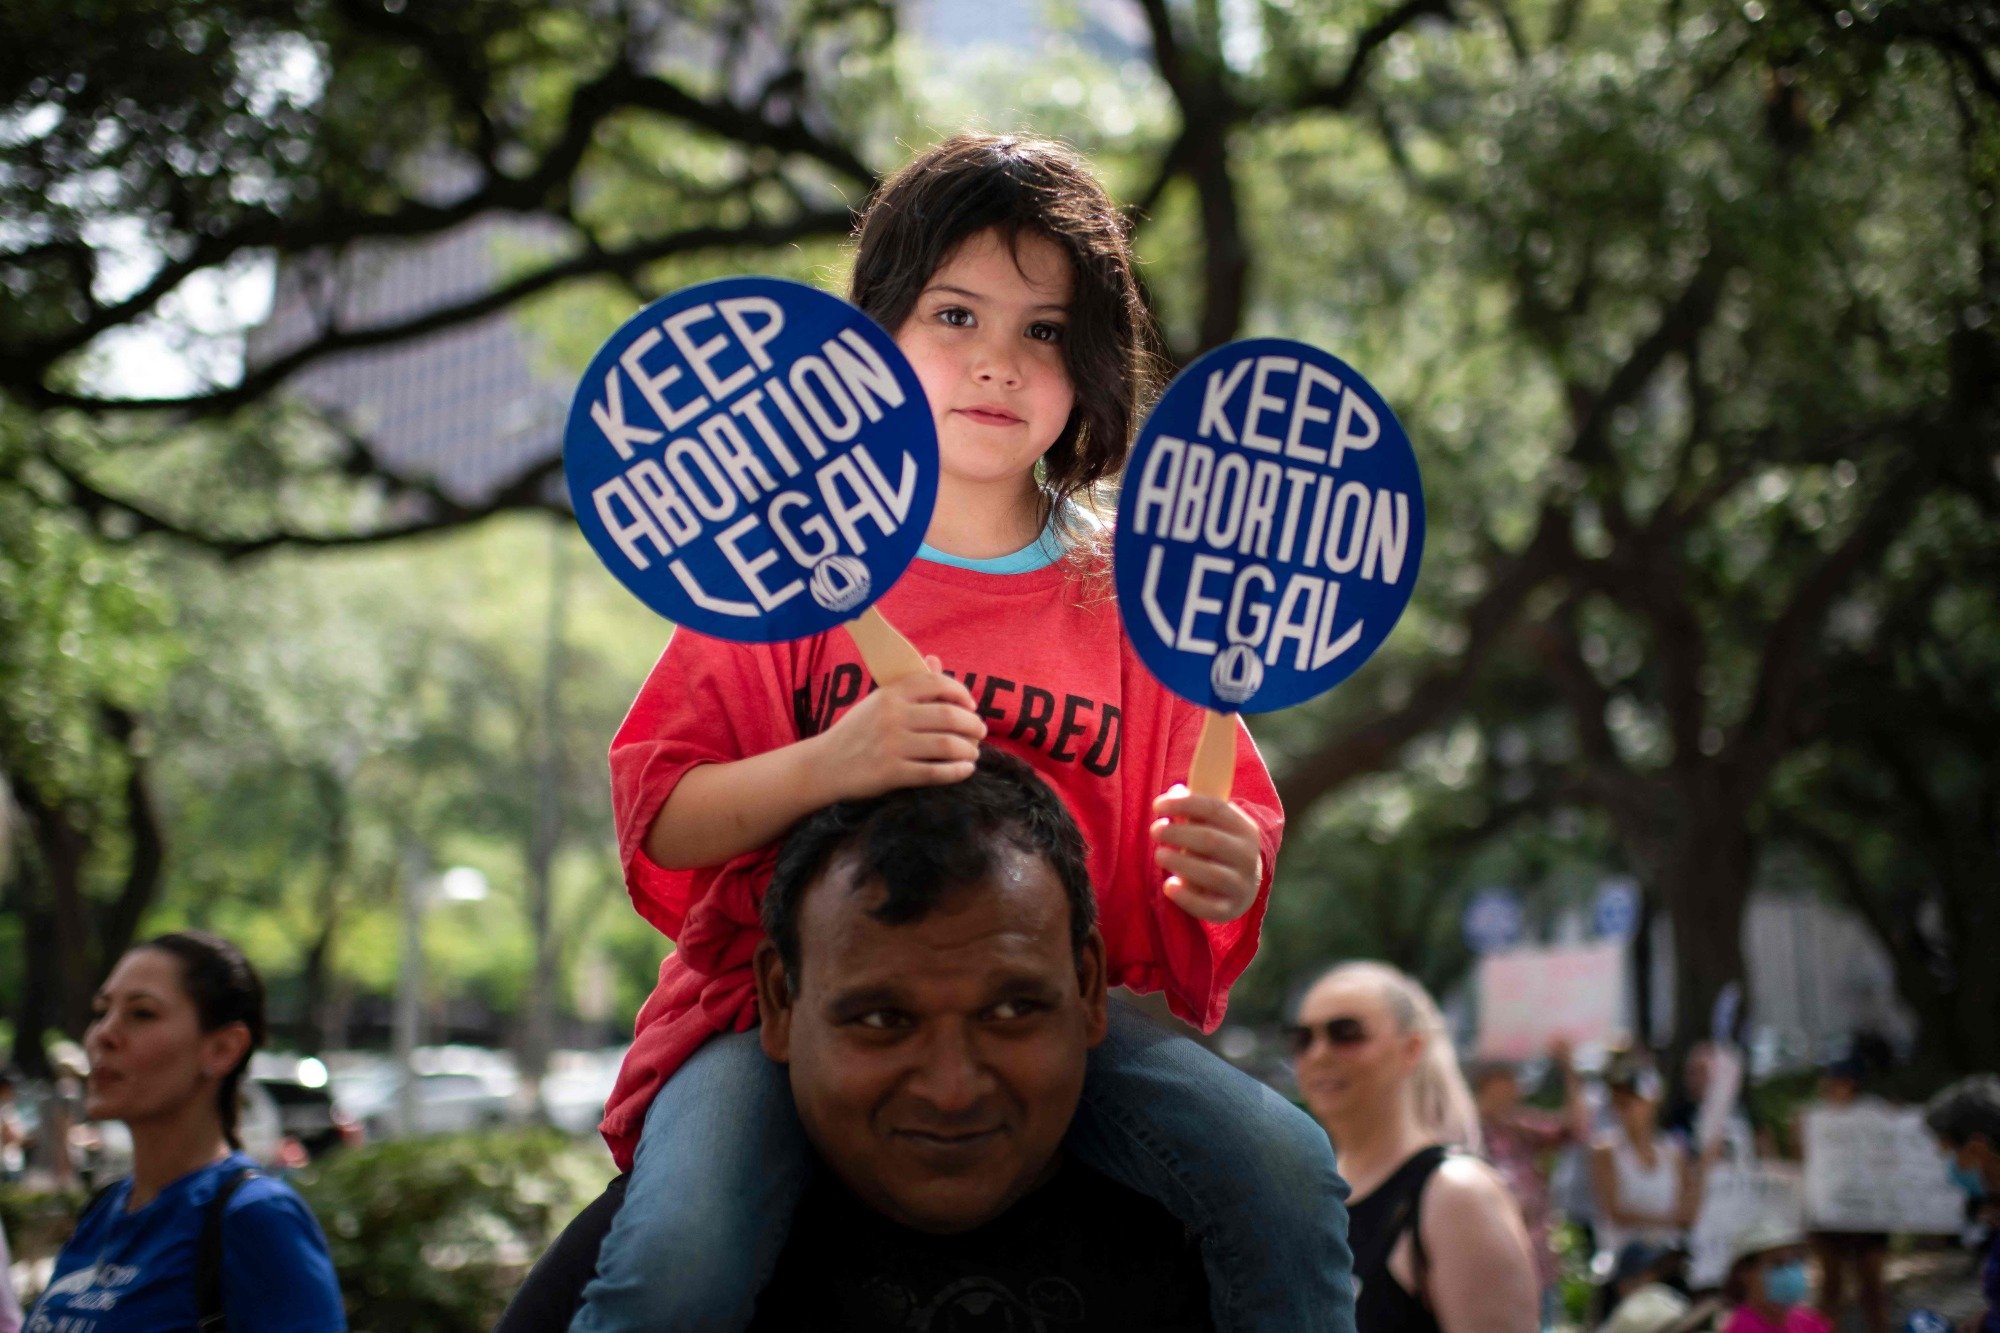 A young child sits on the shoulders of an adult. They are holding two small signs that read "Keep abortion legal". 